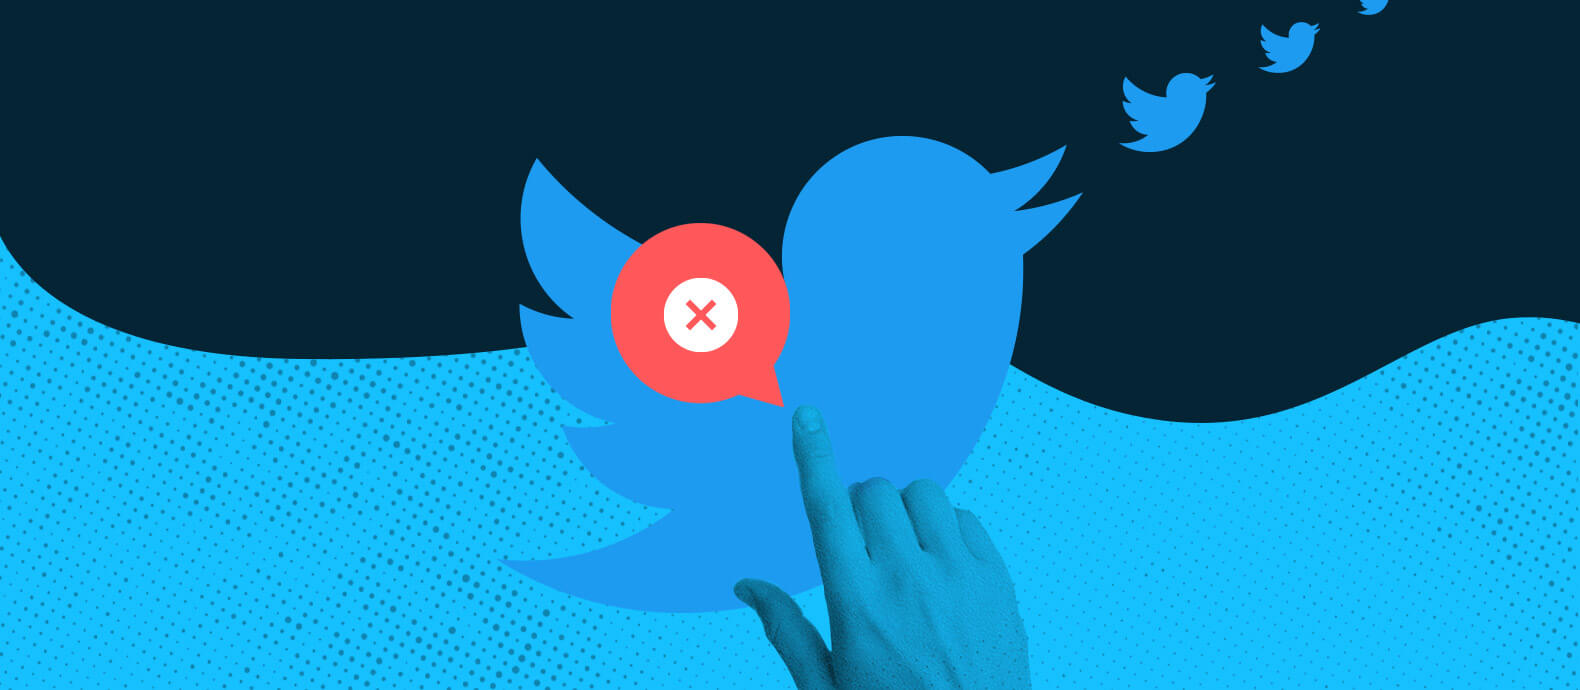 How to take down a Twitter account